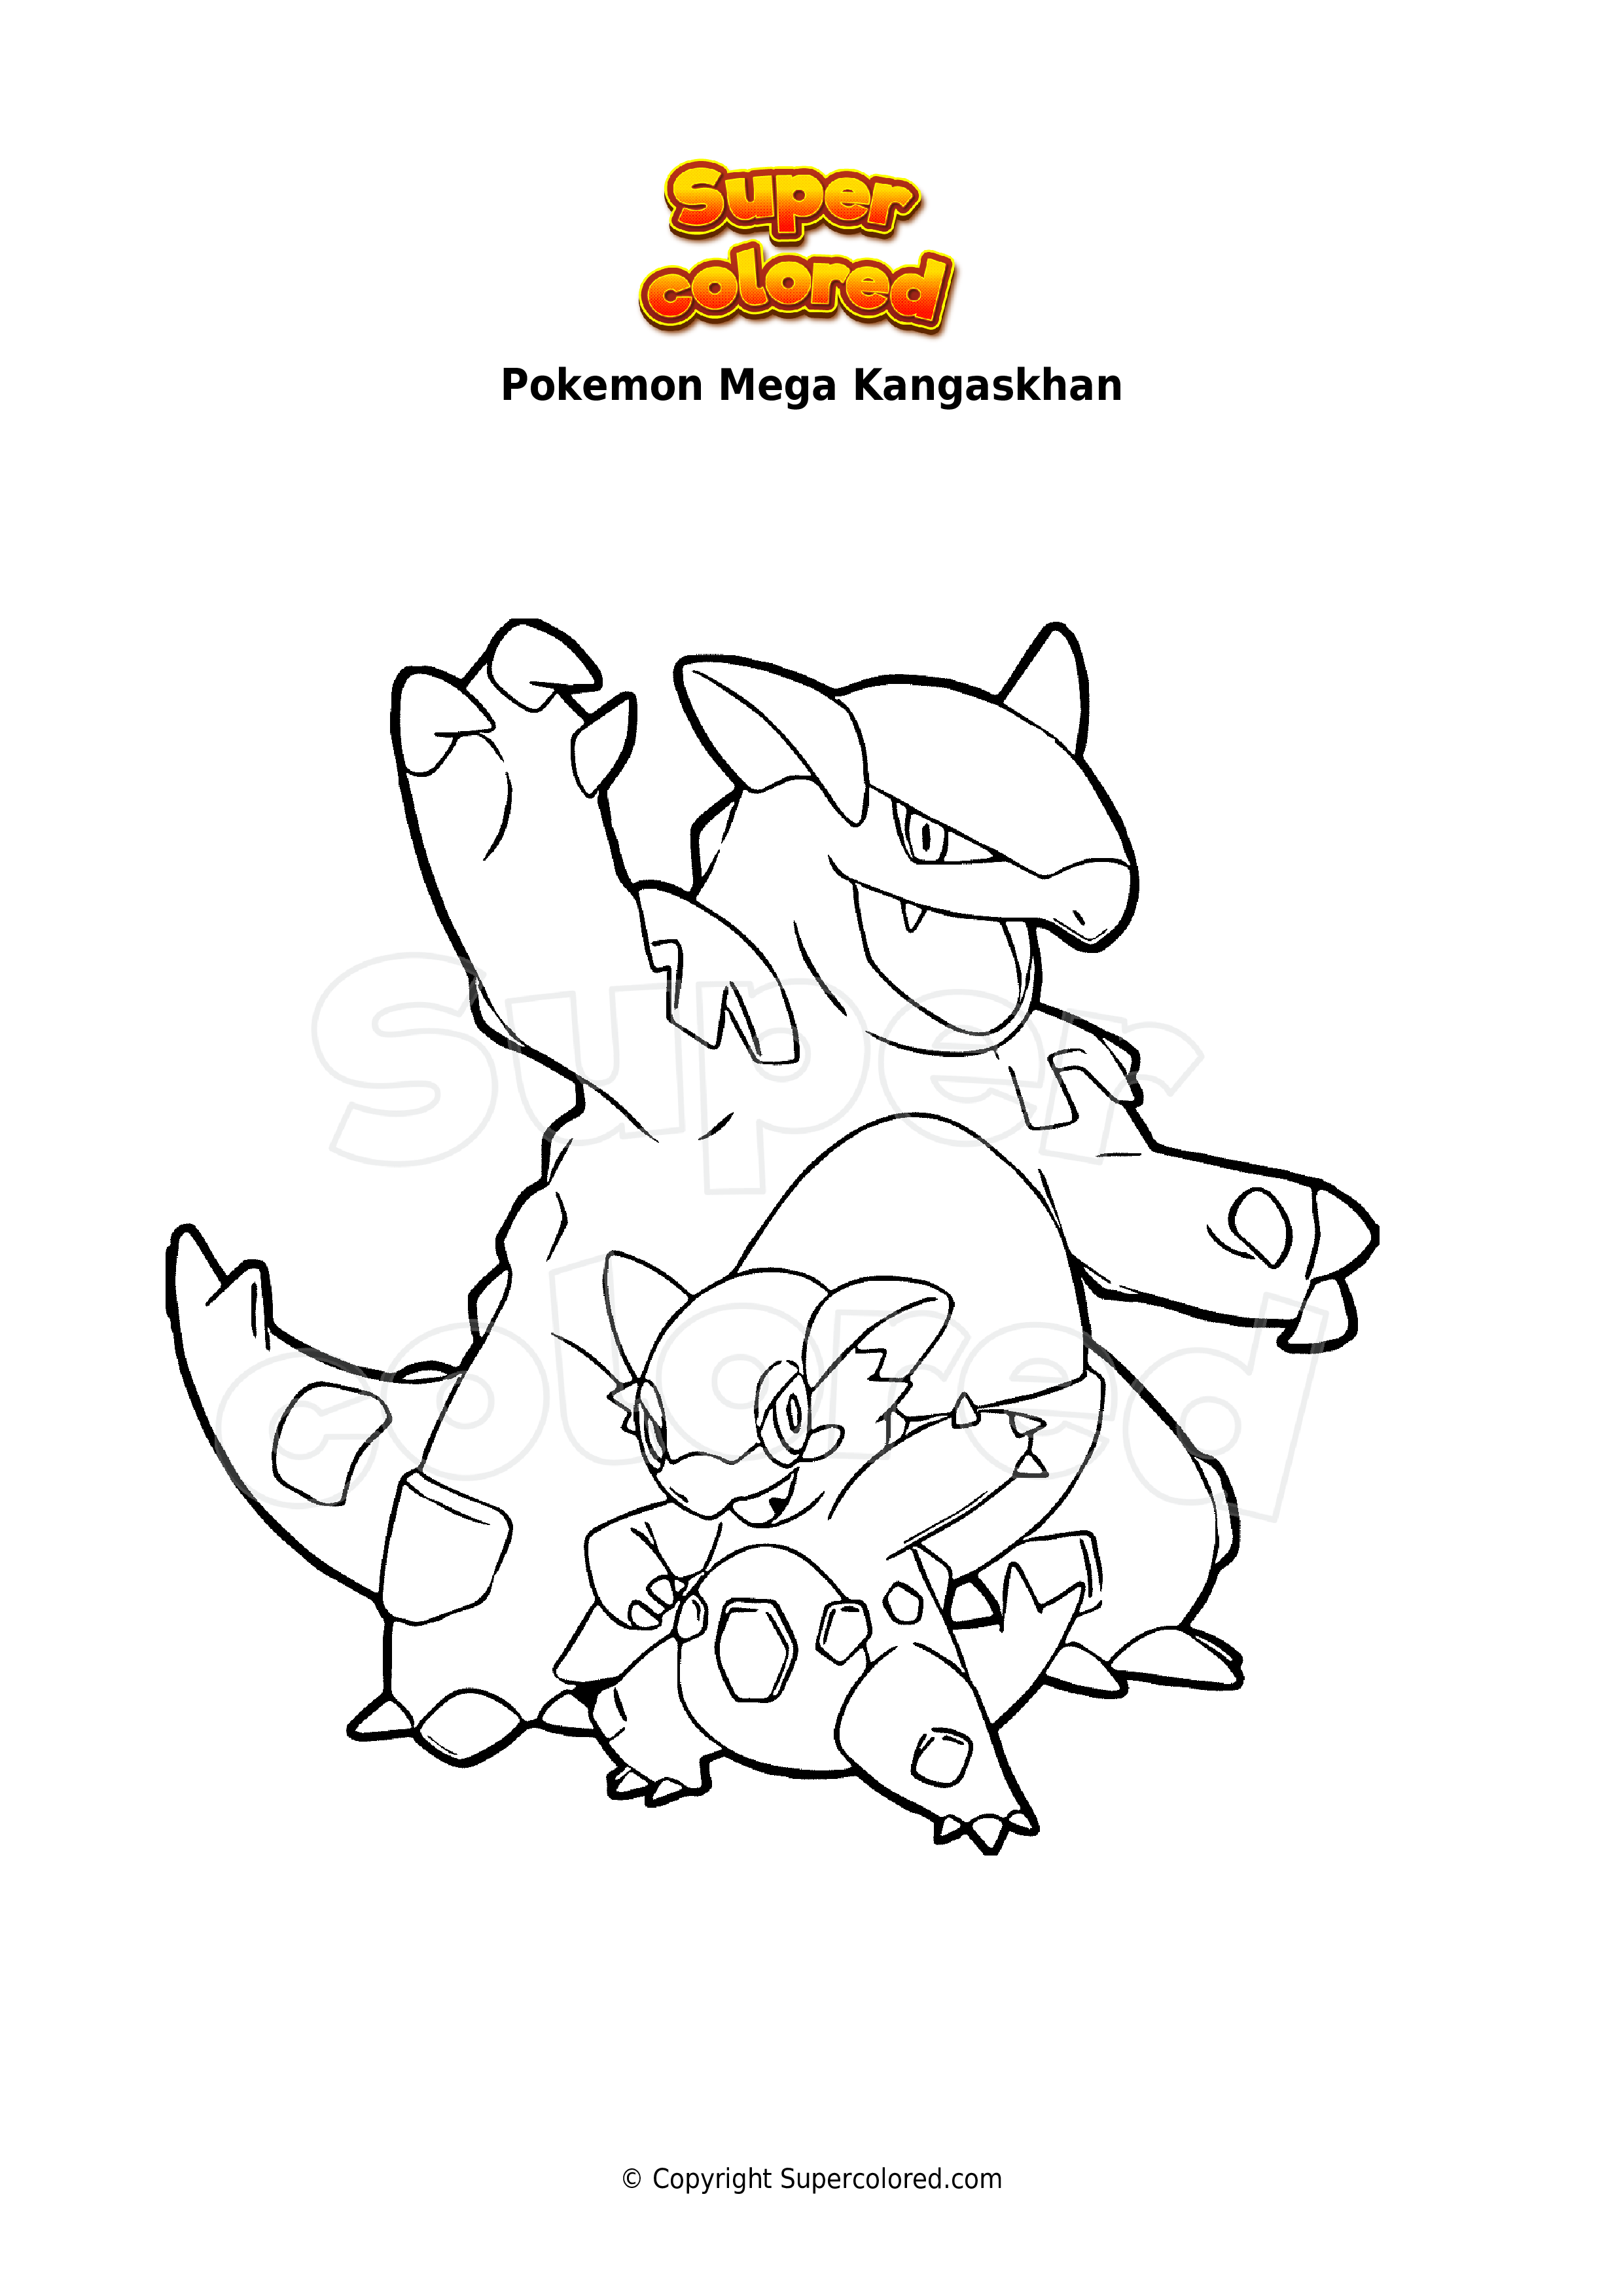 Pokemon Roserade Coloring Pages: Fun and Creative Activities